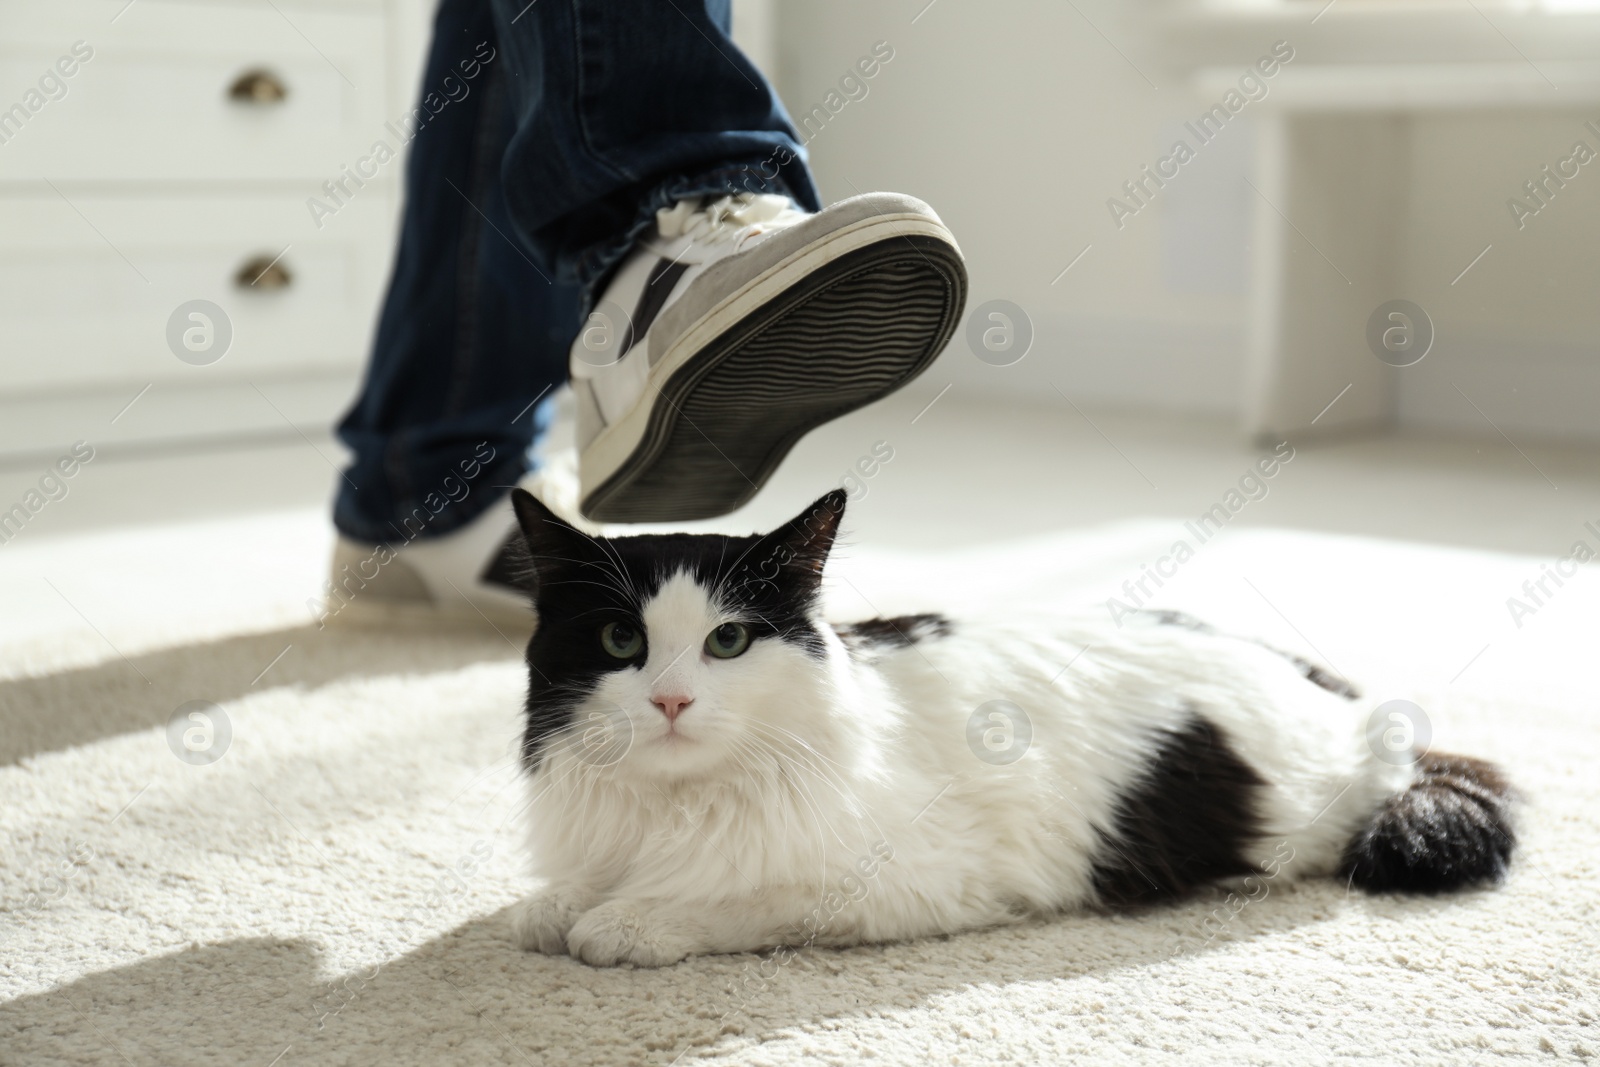 Photo of Man kicking cat at home, closeup of legs. Domestic violence against pets